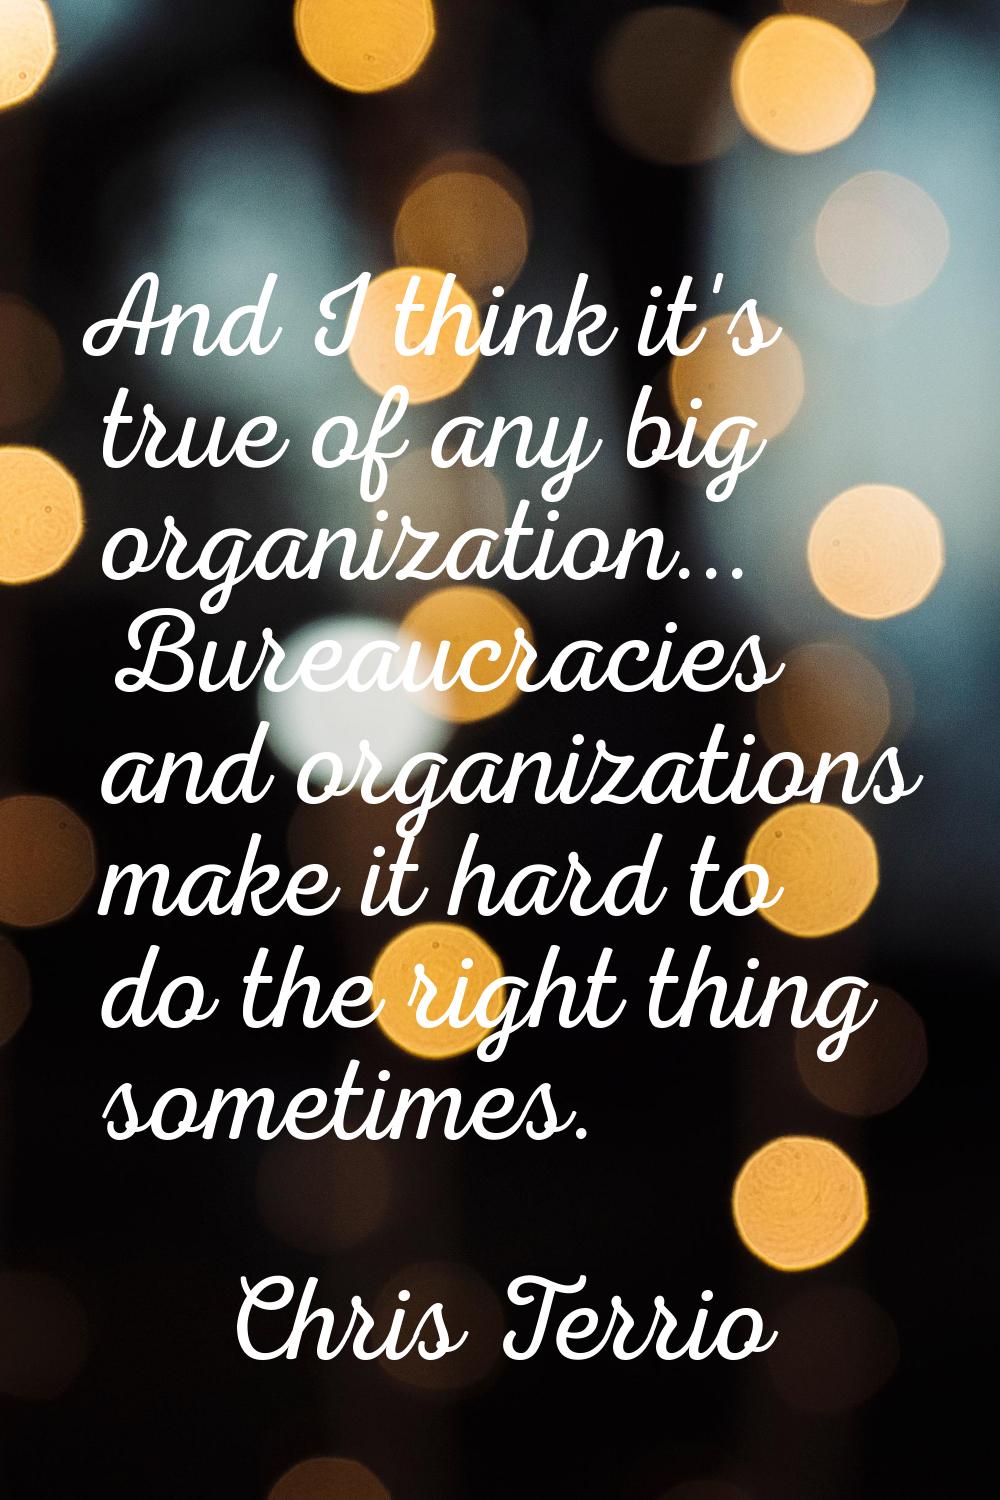 And I think it's true of any big organization... Bureaucracies and organizations make it hard to do